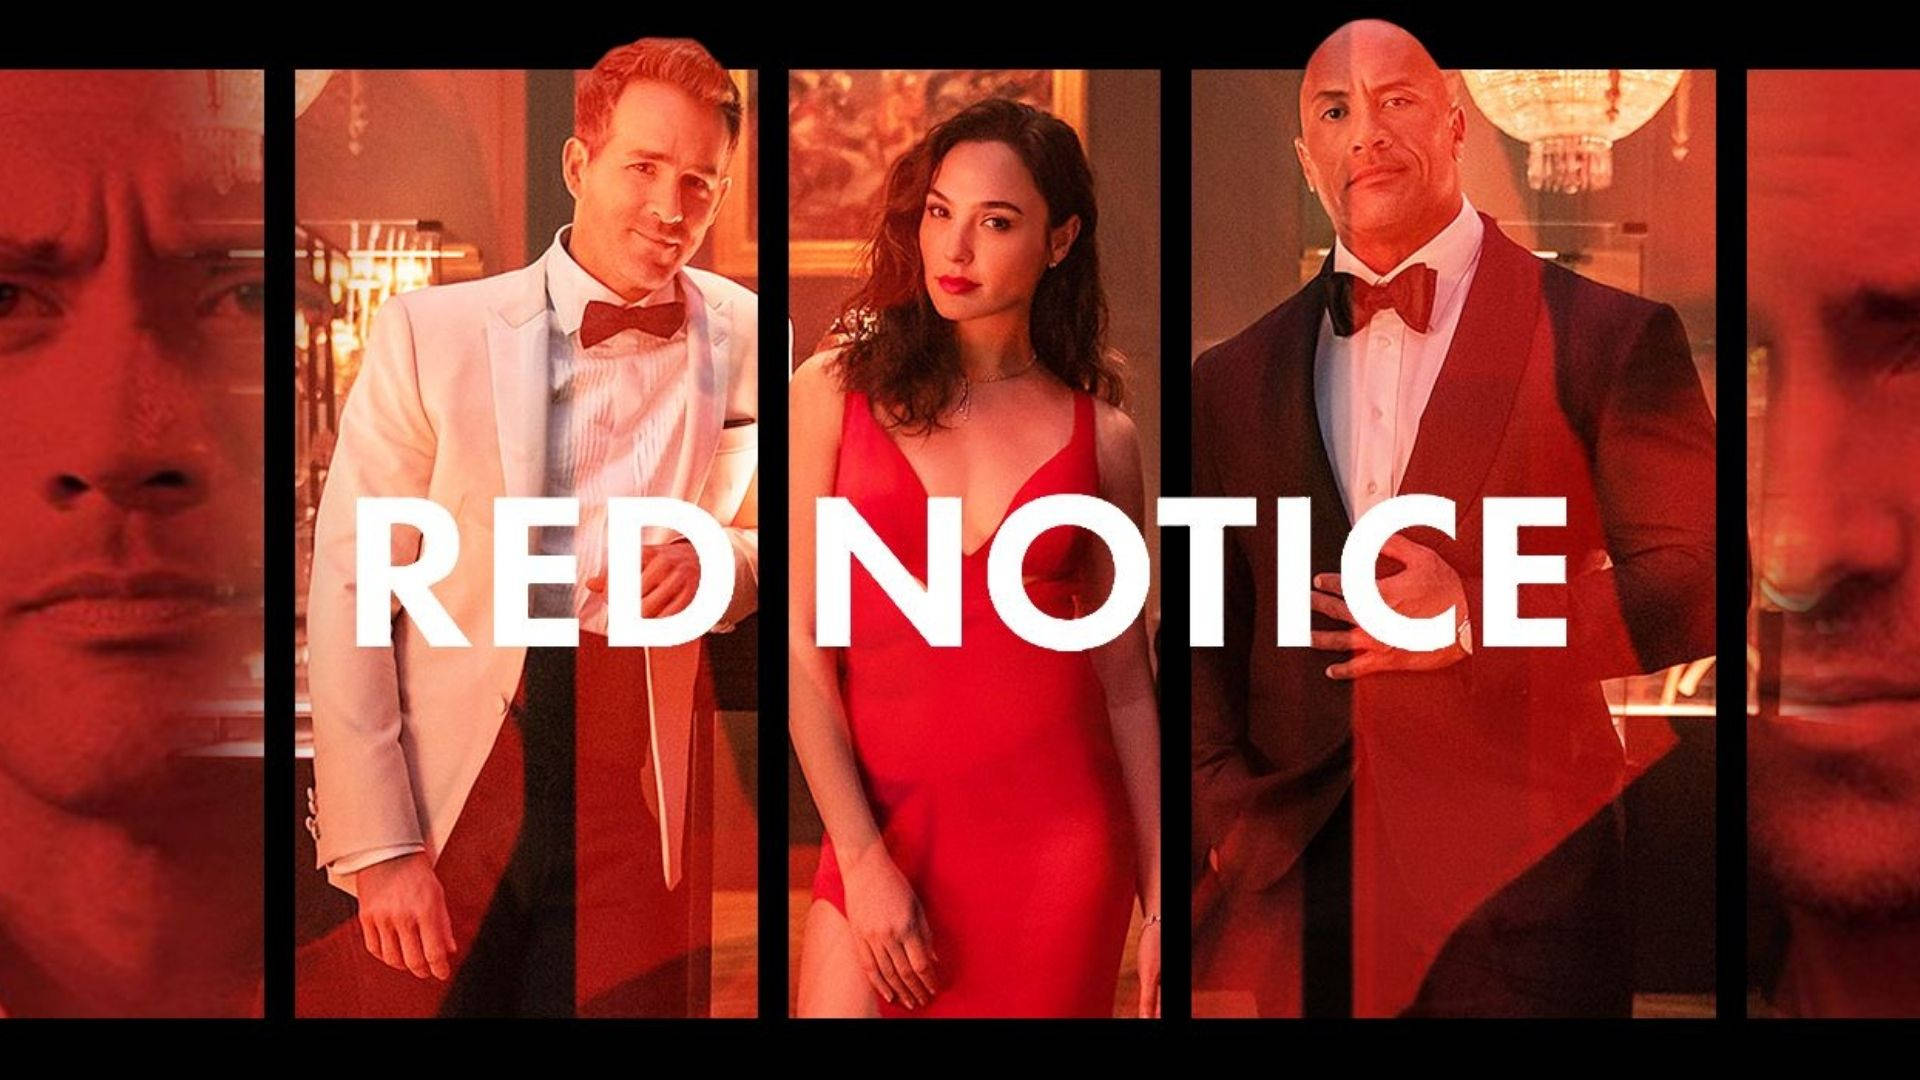 Red Notice Aesthetic Poster Wallpaper